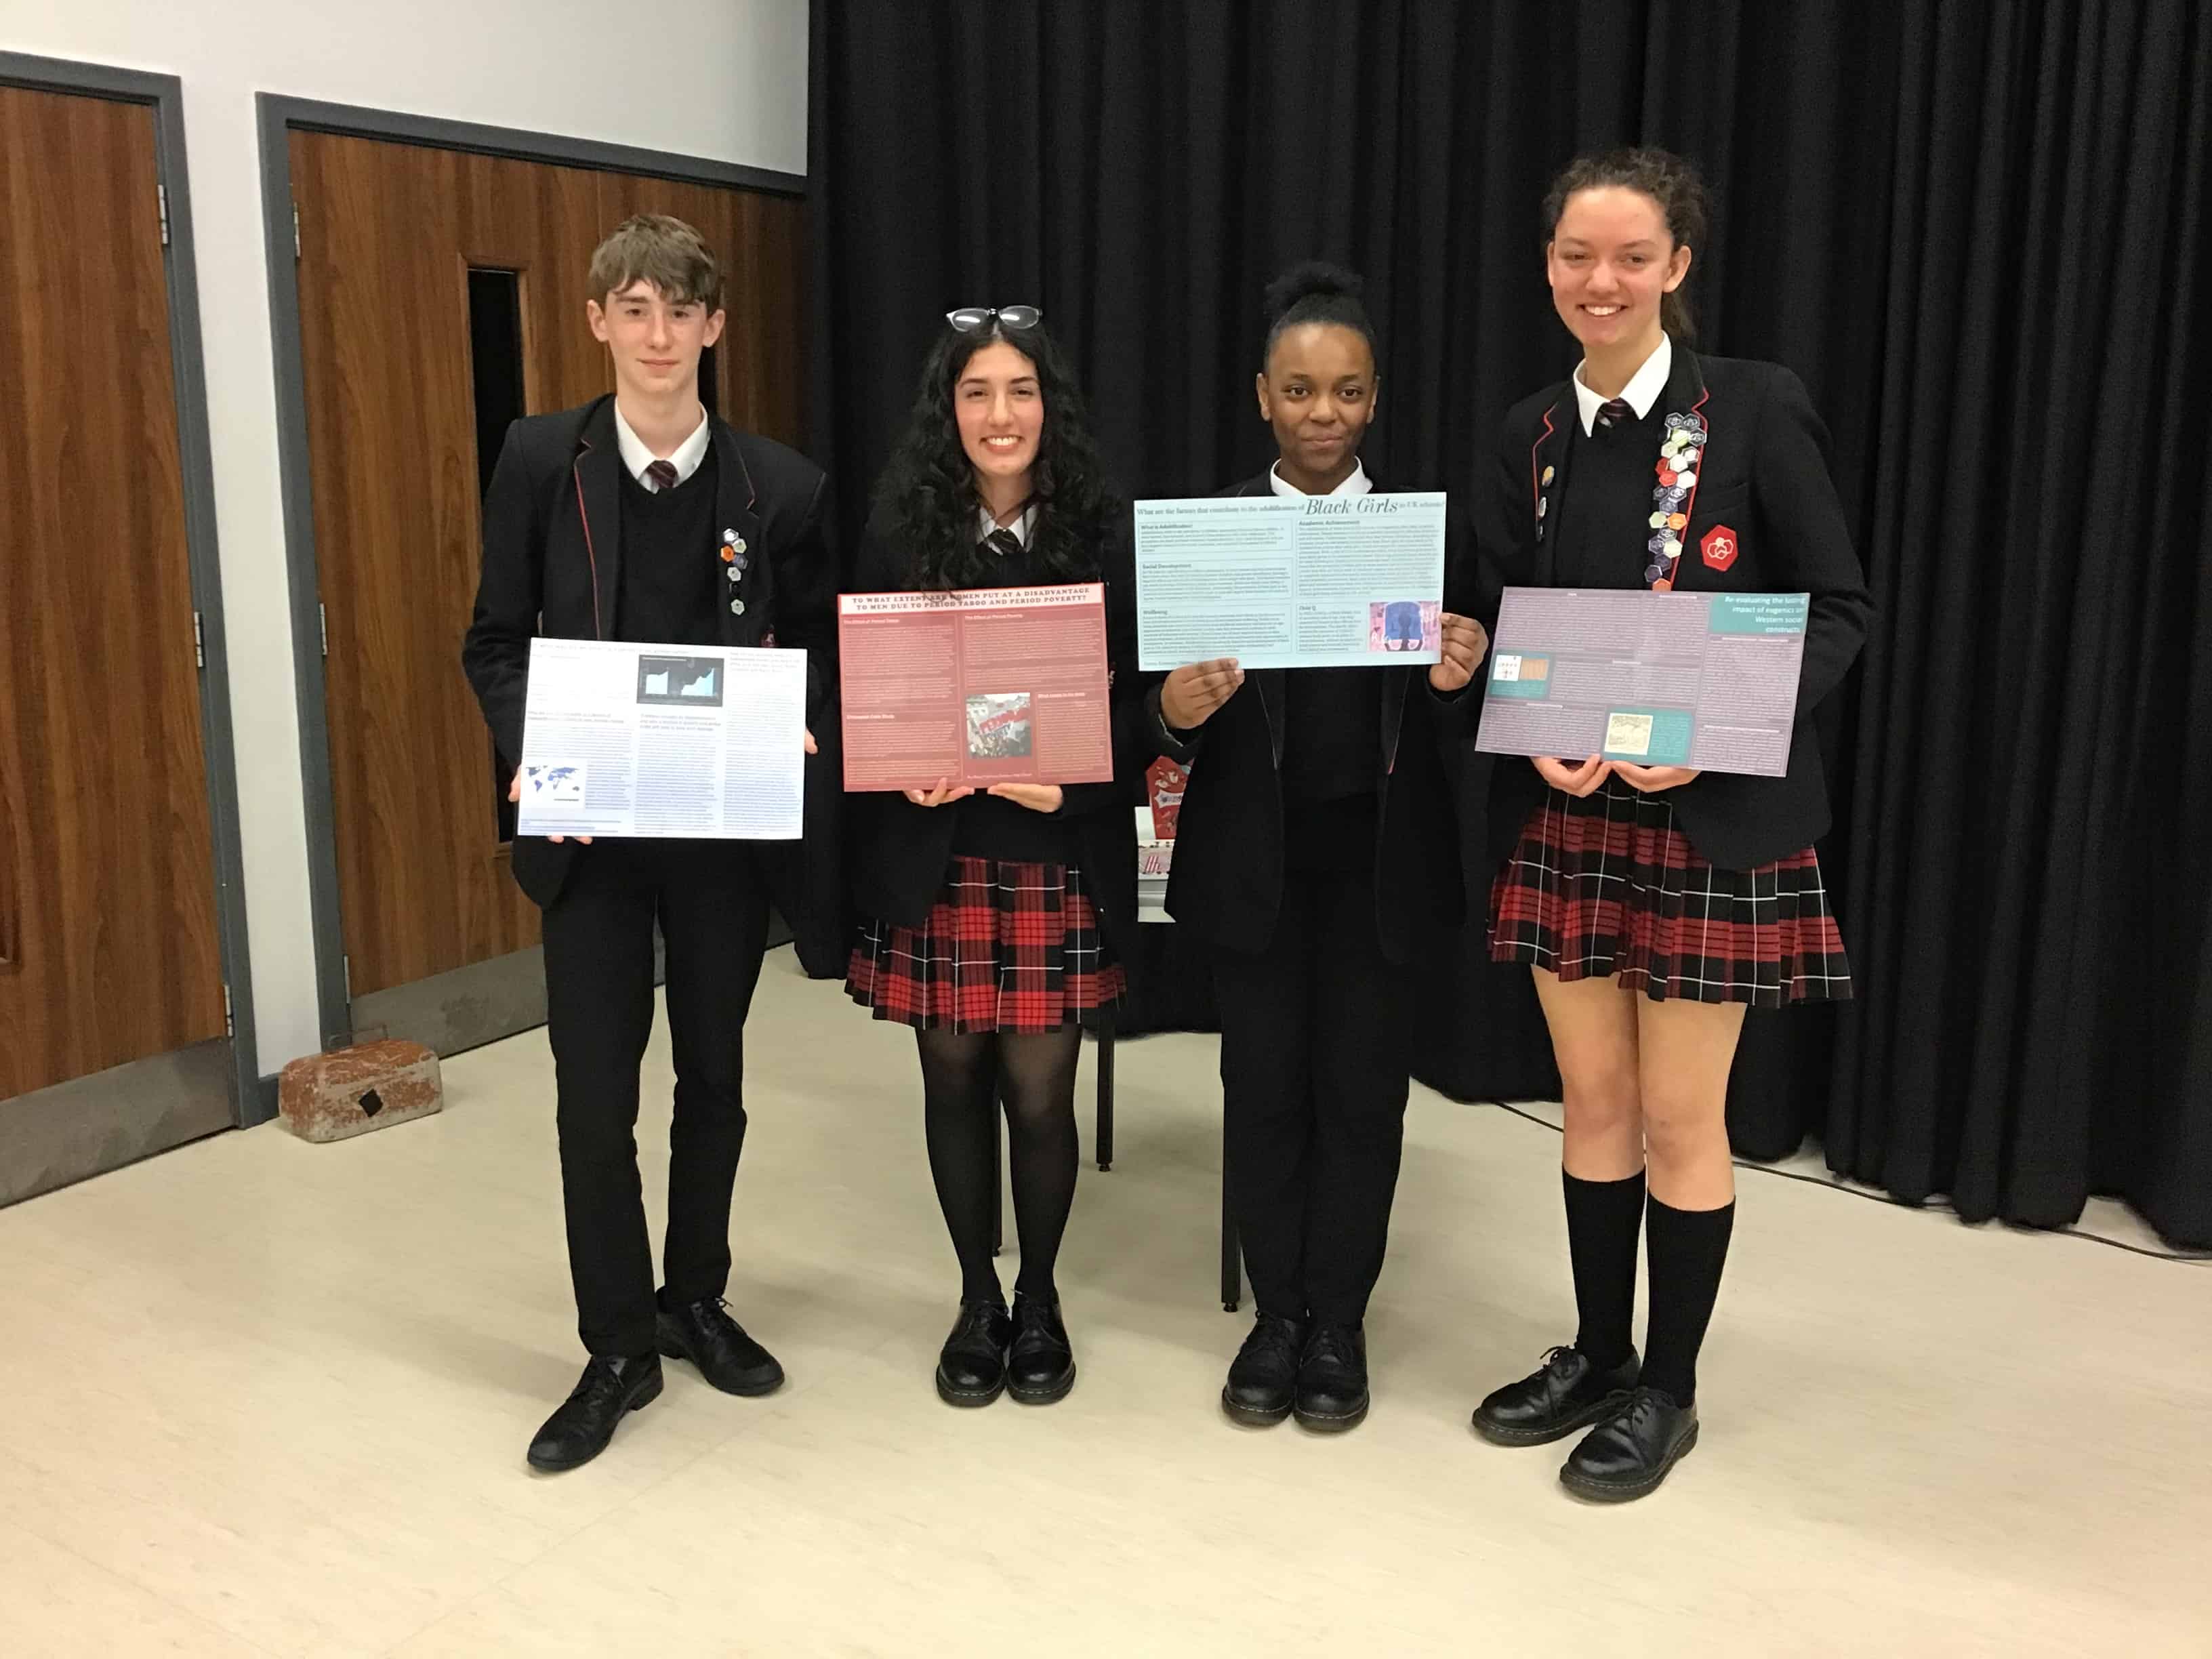 Four students from Didsbury High School hold their Apertura research posters at Cheadle Hulme High School.